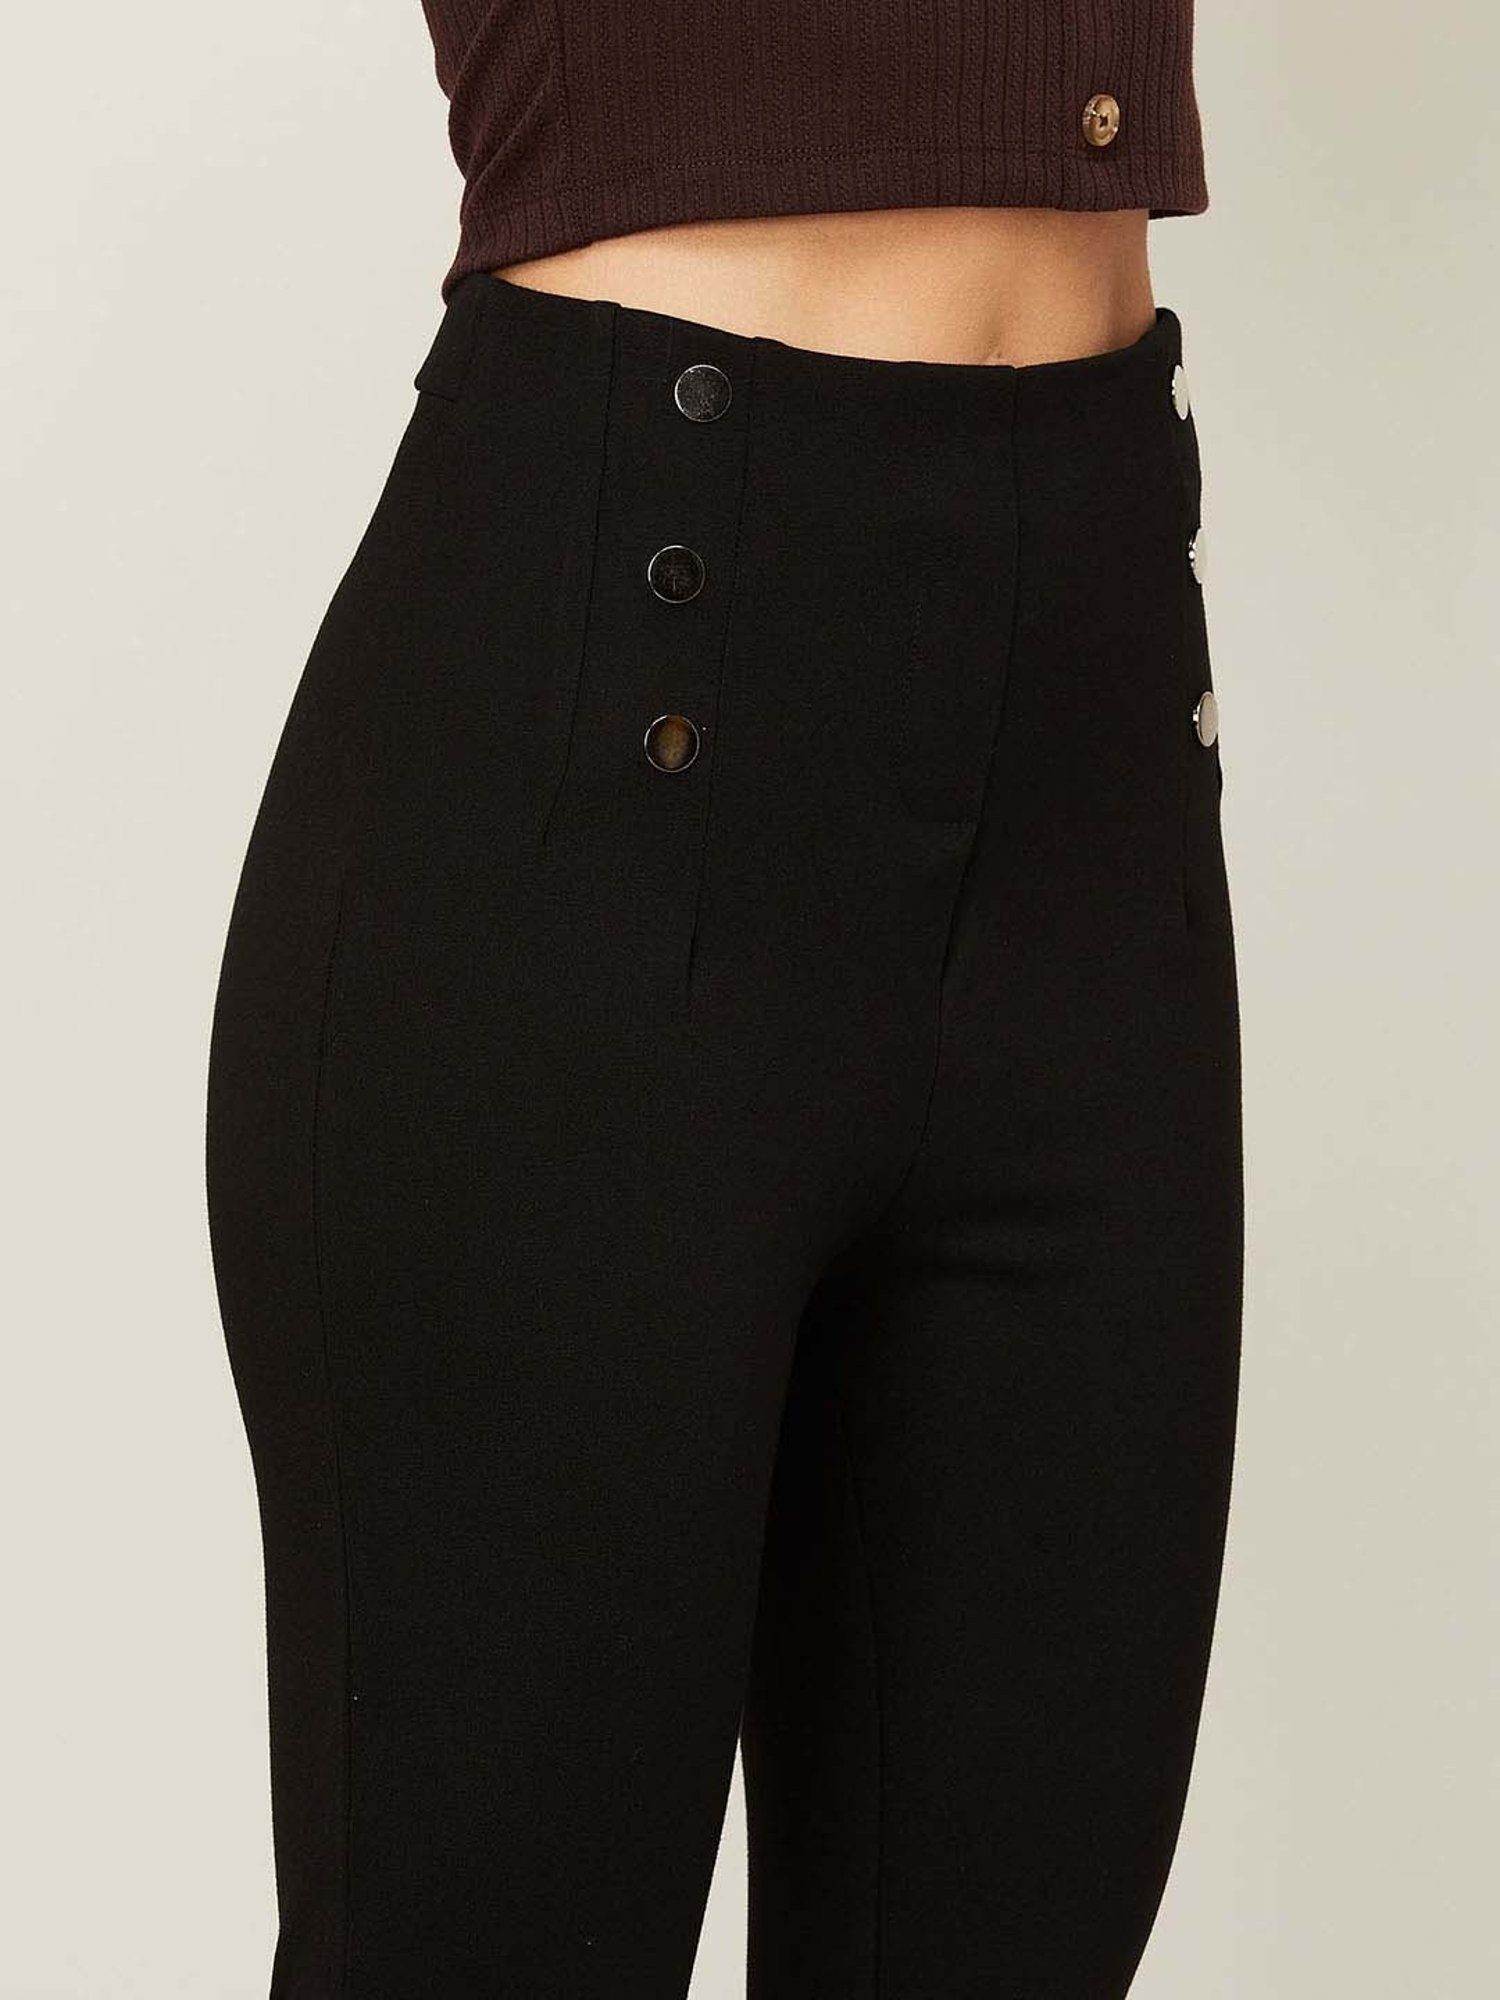 Ginger by Lifestyle Black Mid Rise Pants